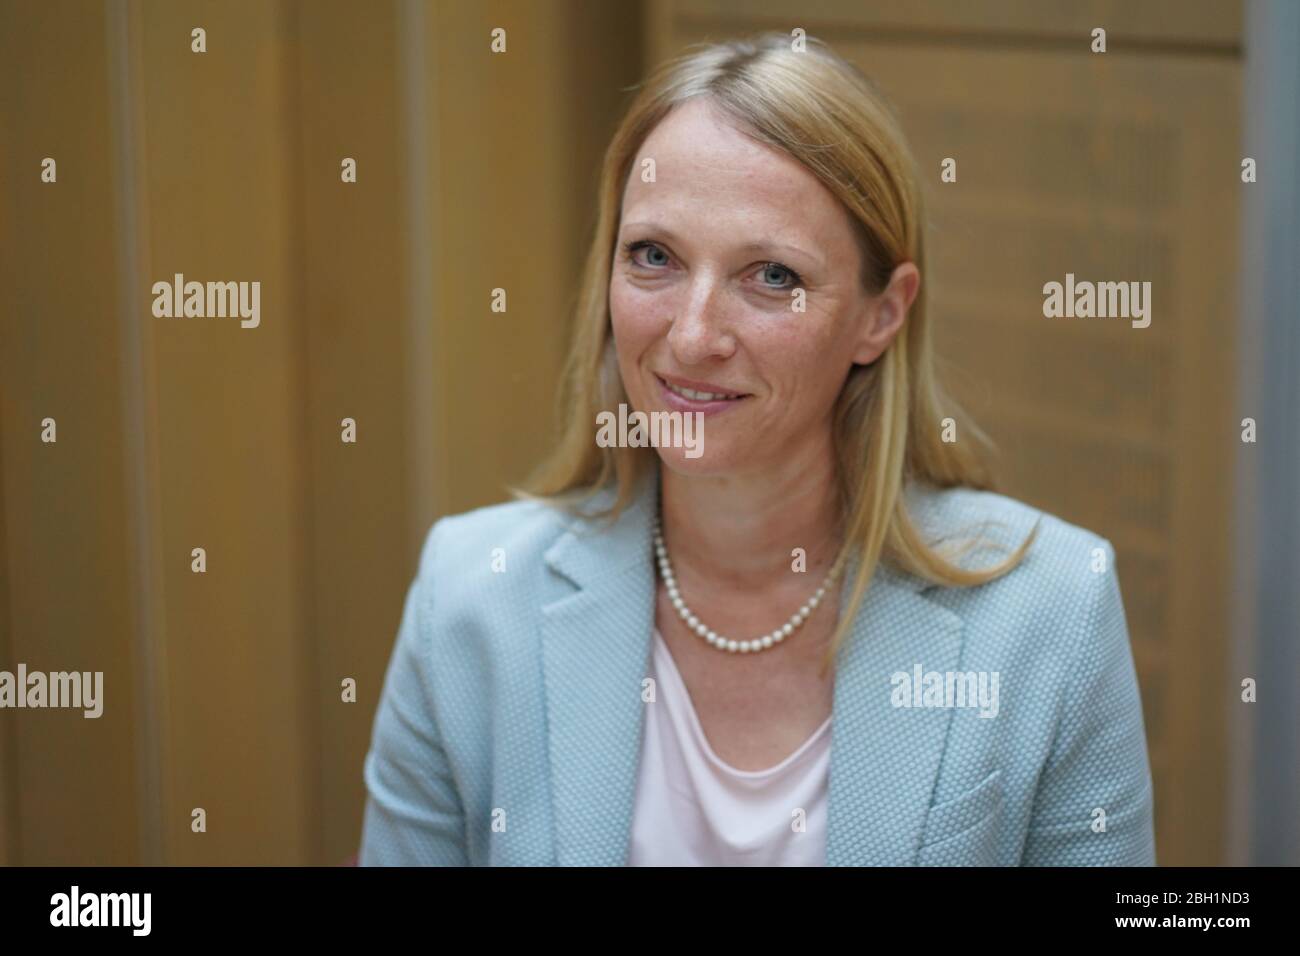 Berlin, Germany. 23rd Apr, 2020. Nina Thom, Senior Public Prosecutor and Head of the Asset Recovery Department, sits at a press conference of the Berlin Public Prosecutor's Office on the subject of 'Combating fraud in connection with Corona emergency aid'. Credit: Jörg Carstensen/dpa/Alamy Live News Stock Photo